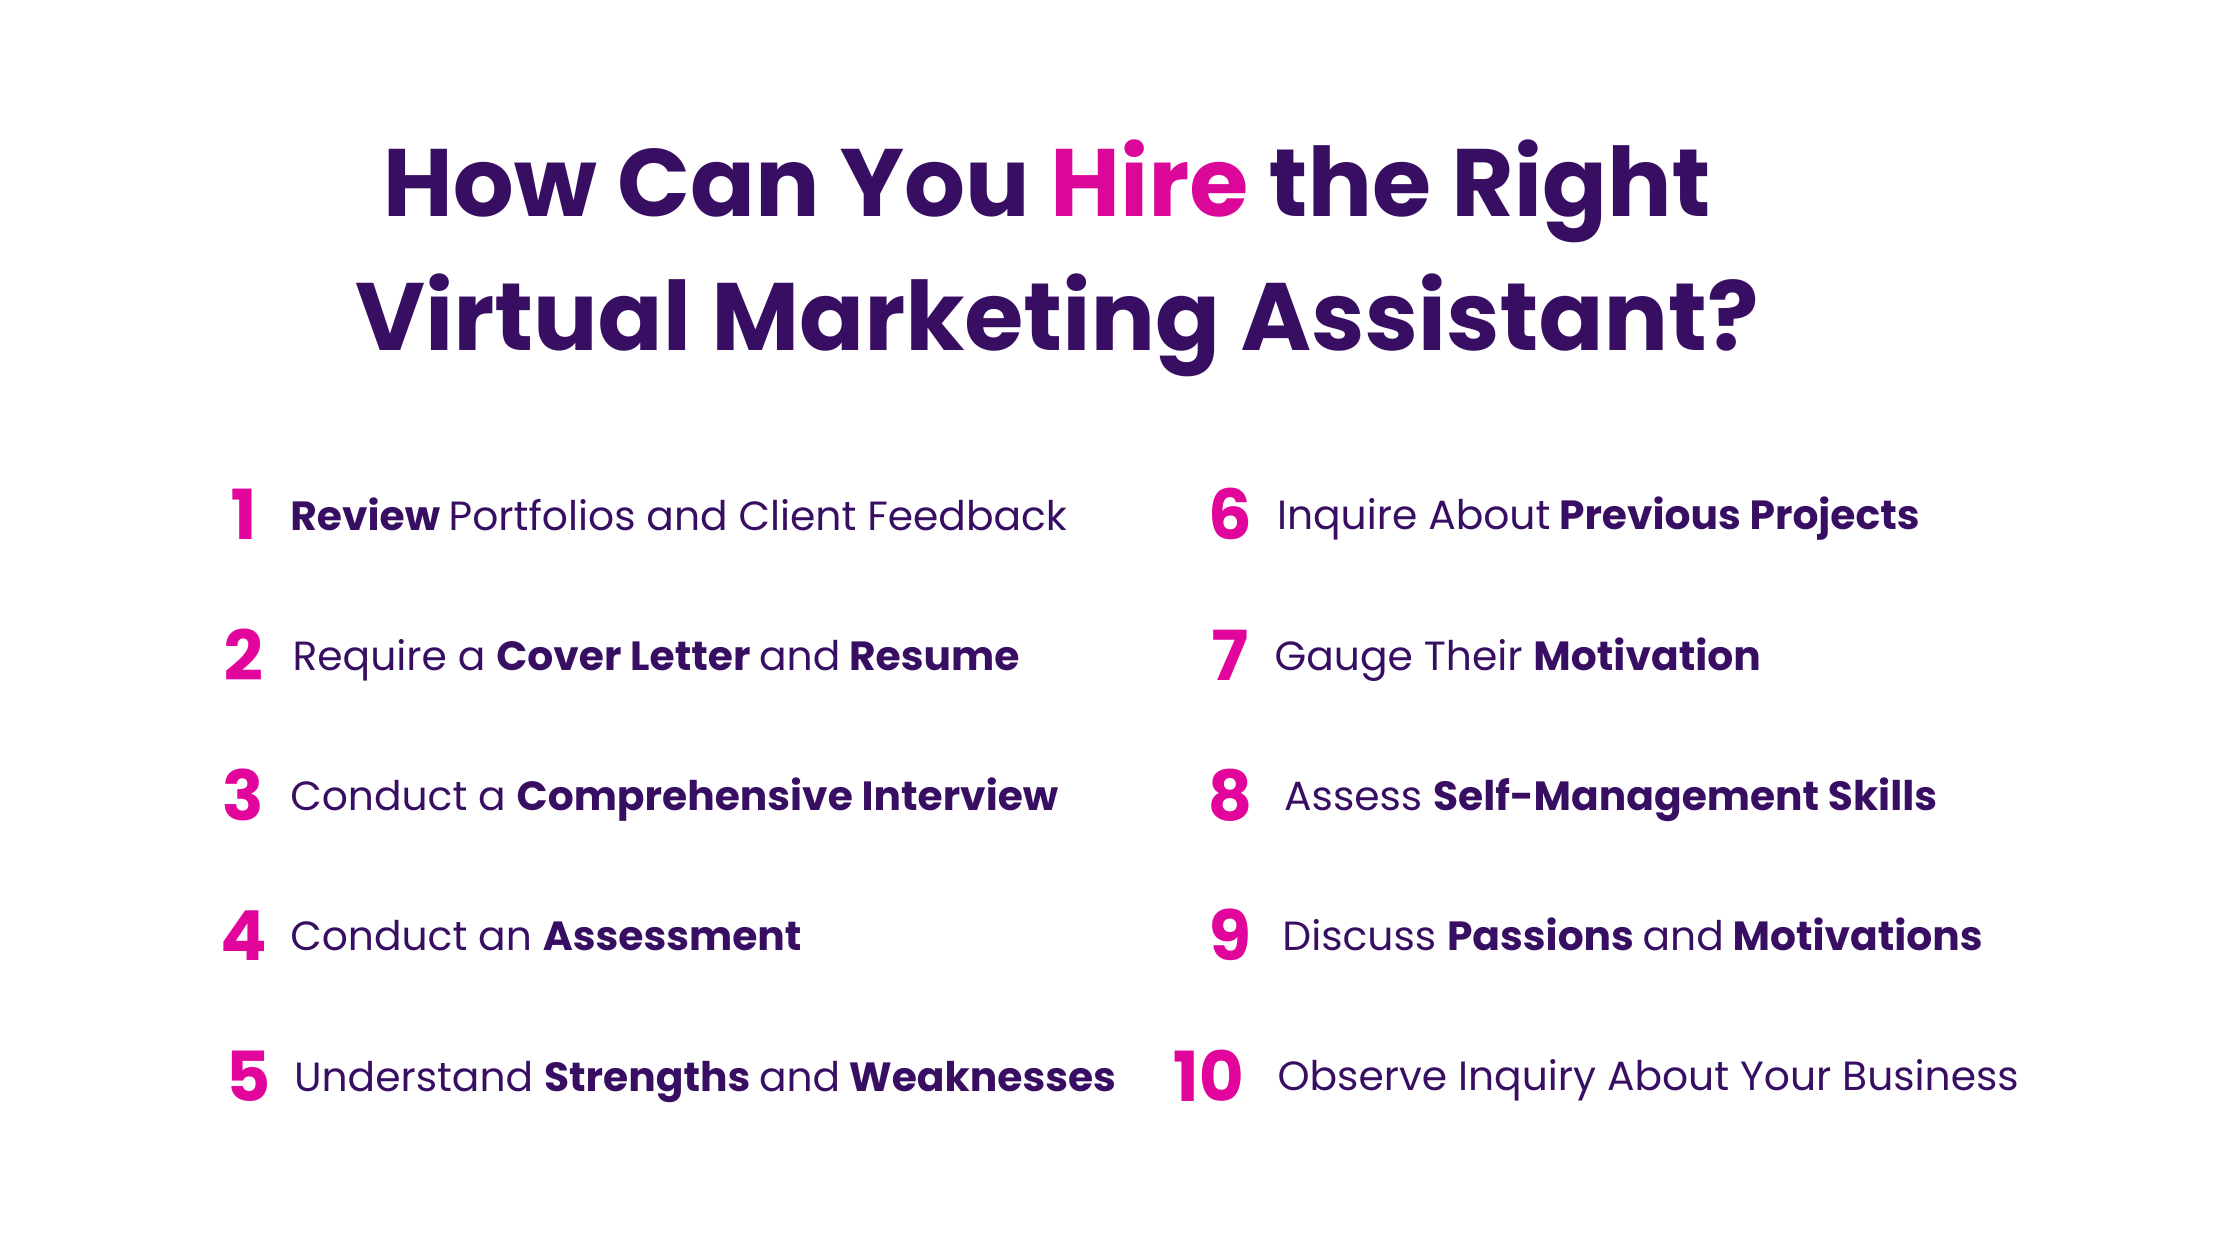 How Can You Hire the Right Virtual Marketing Assistant